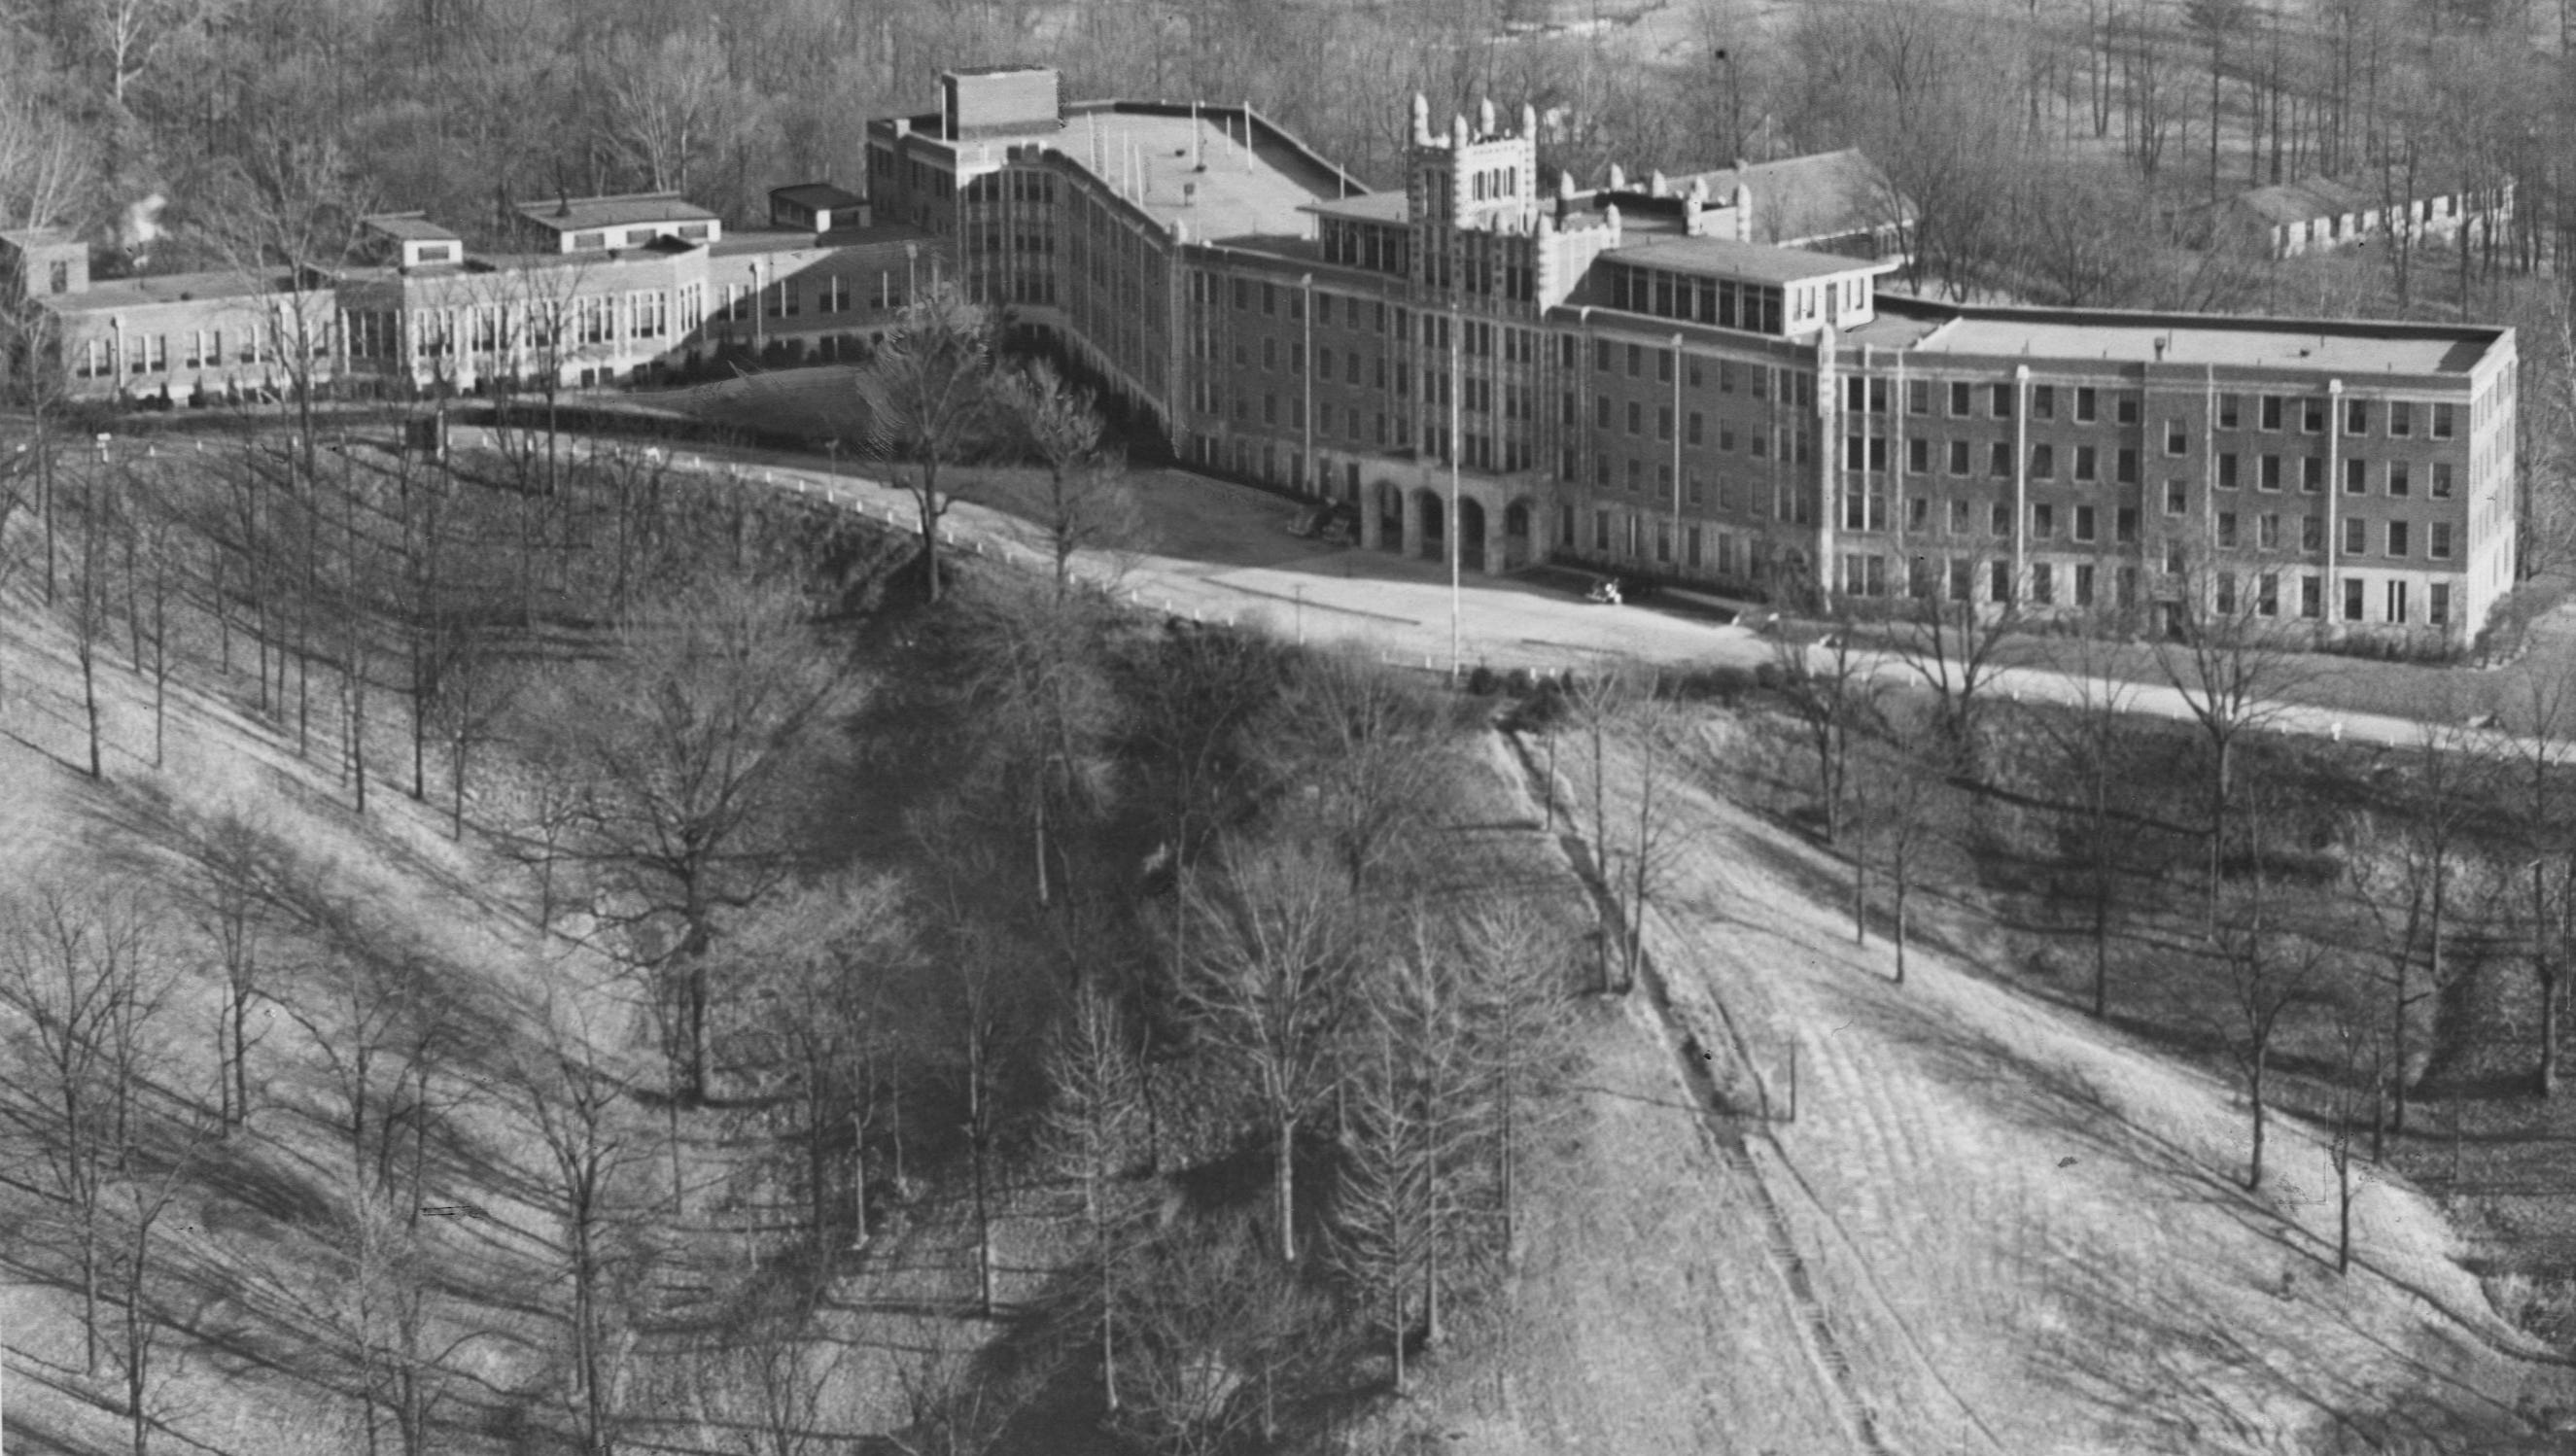 haunted places in Kentucky, Indiana: Waverly Hills, Seelbach